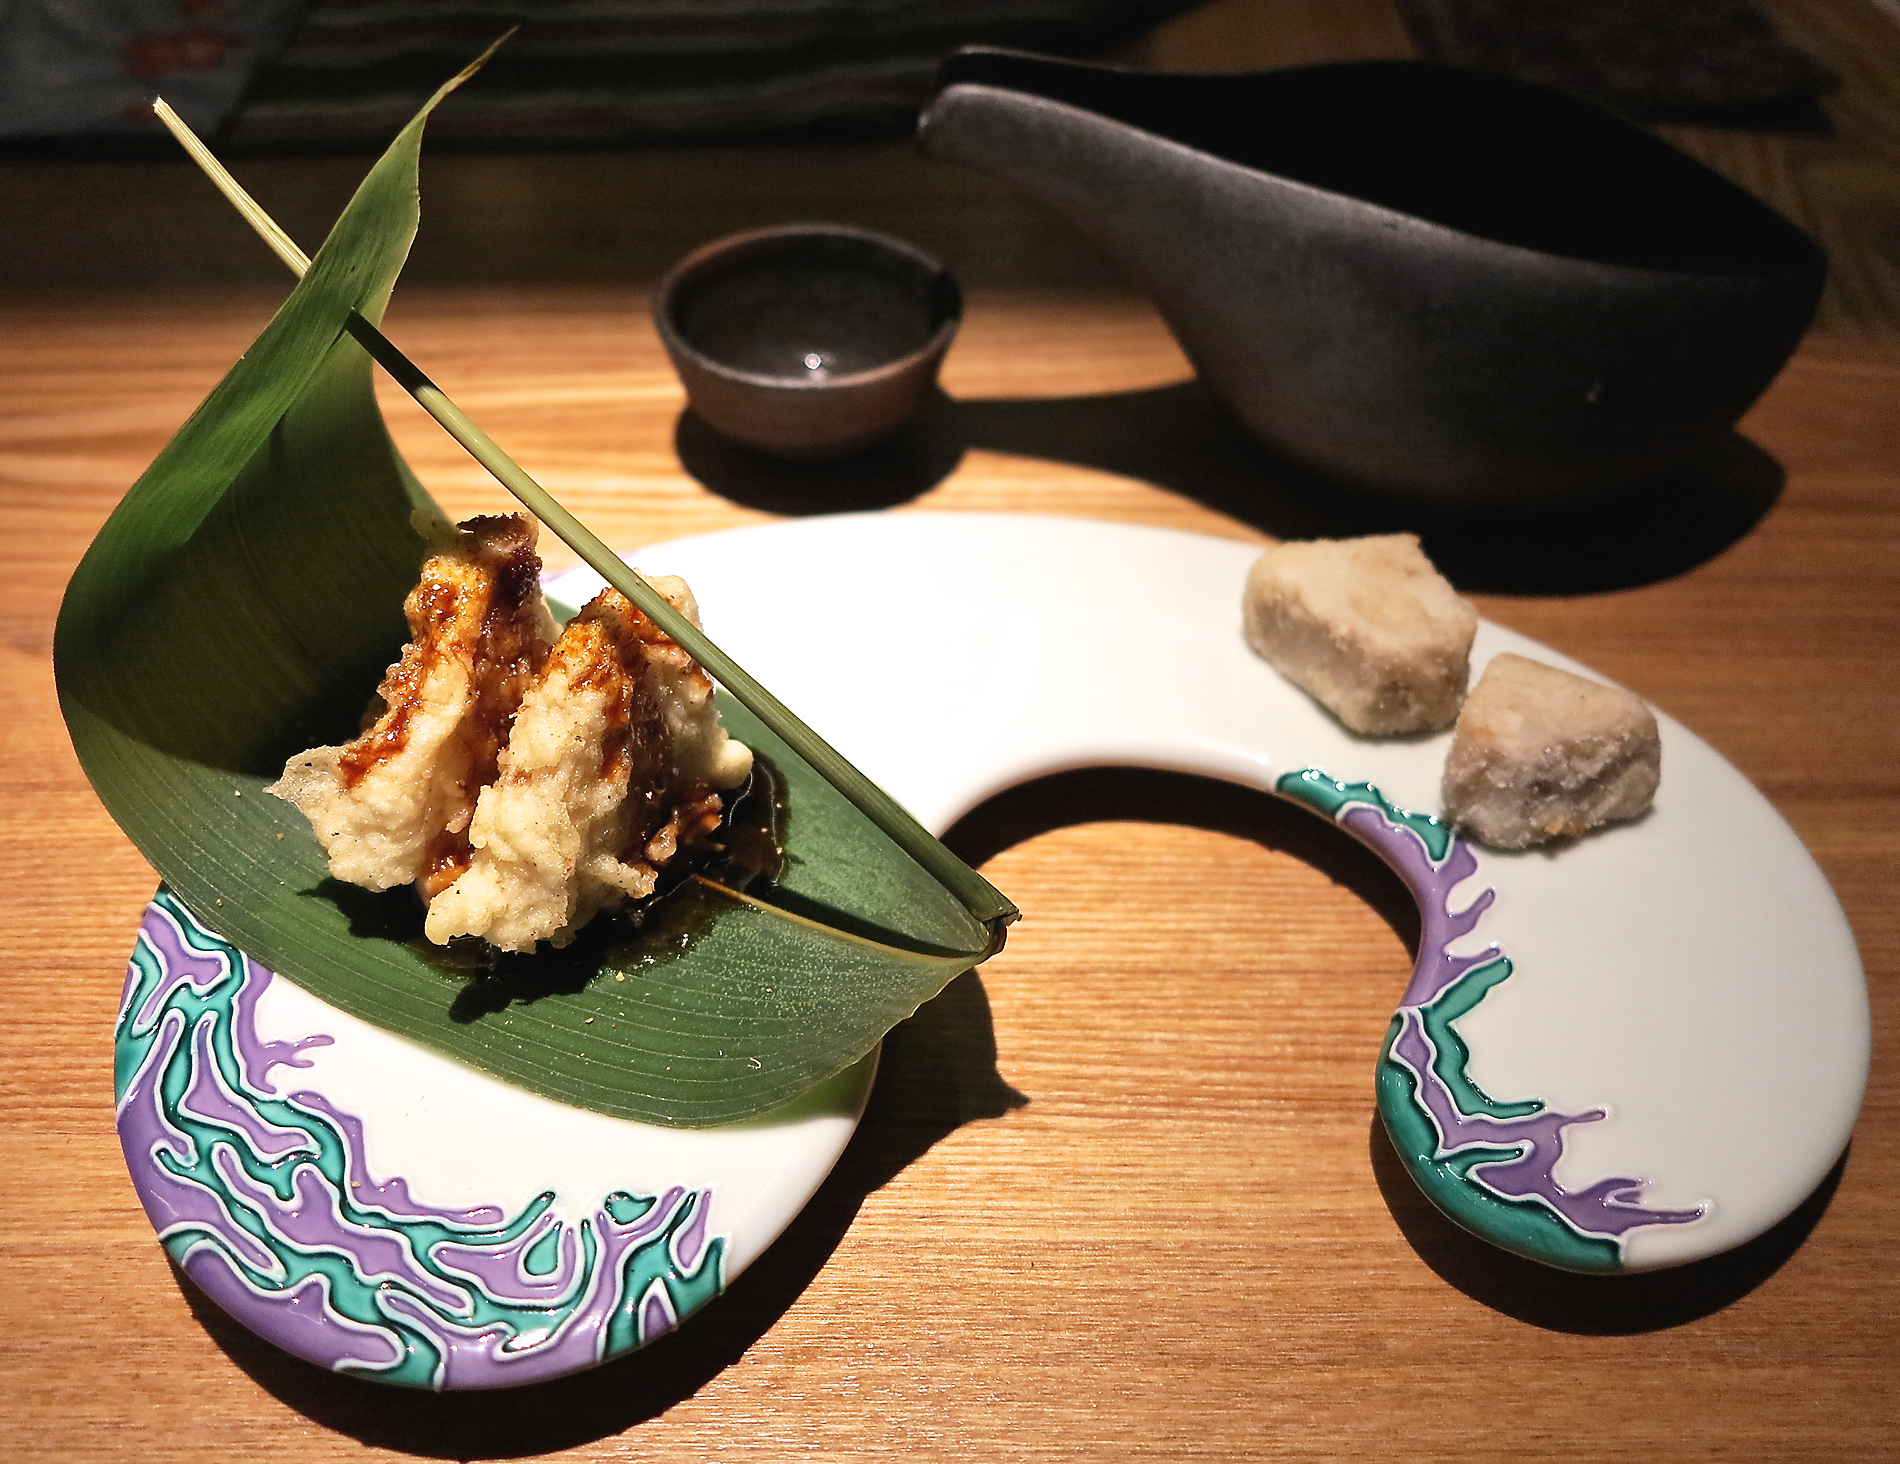 Psychedelicious: GiroGiro's playful spirit is evident in its new Tokyo branch, with unusual dishes including foie gras and battered lotus root on a bamboo-grass leaf. | ROBBIE SWINNERTON